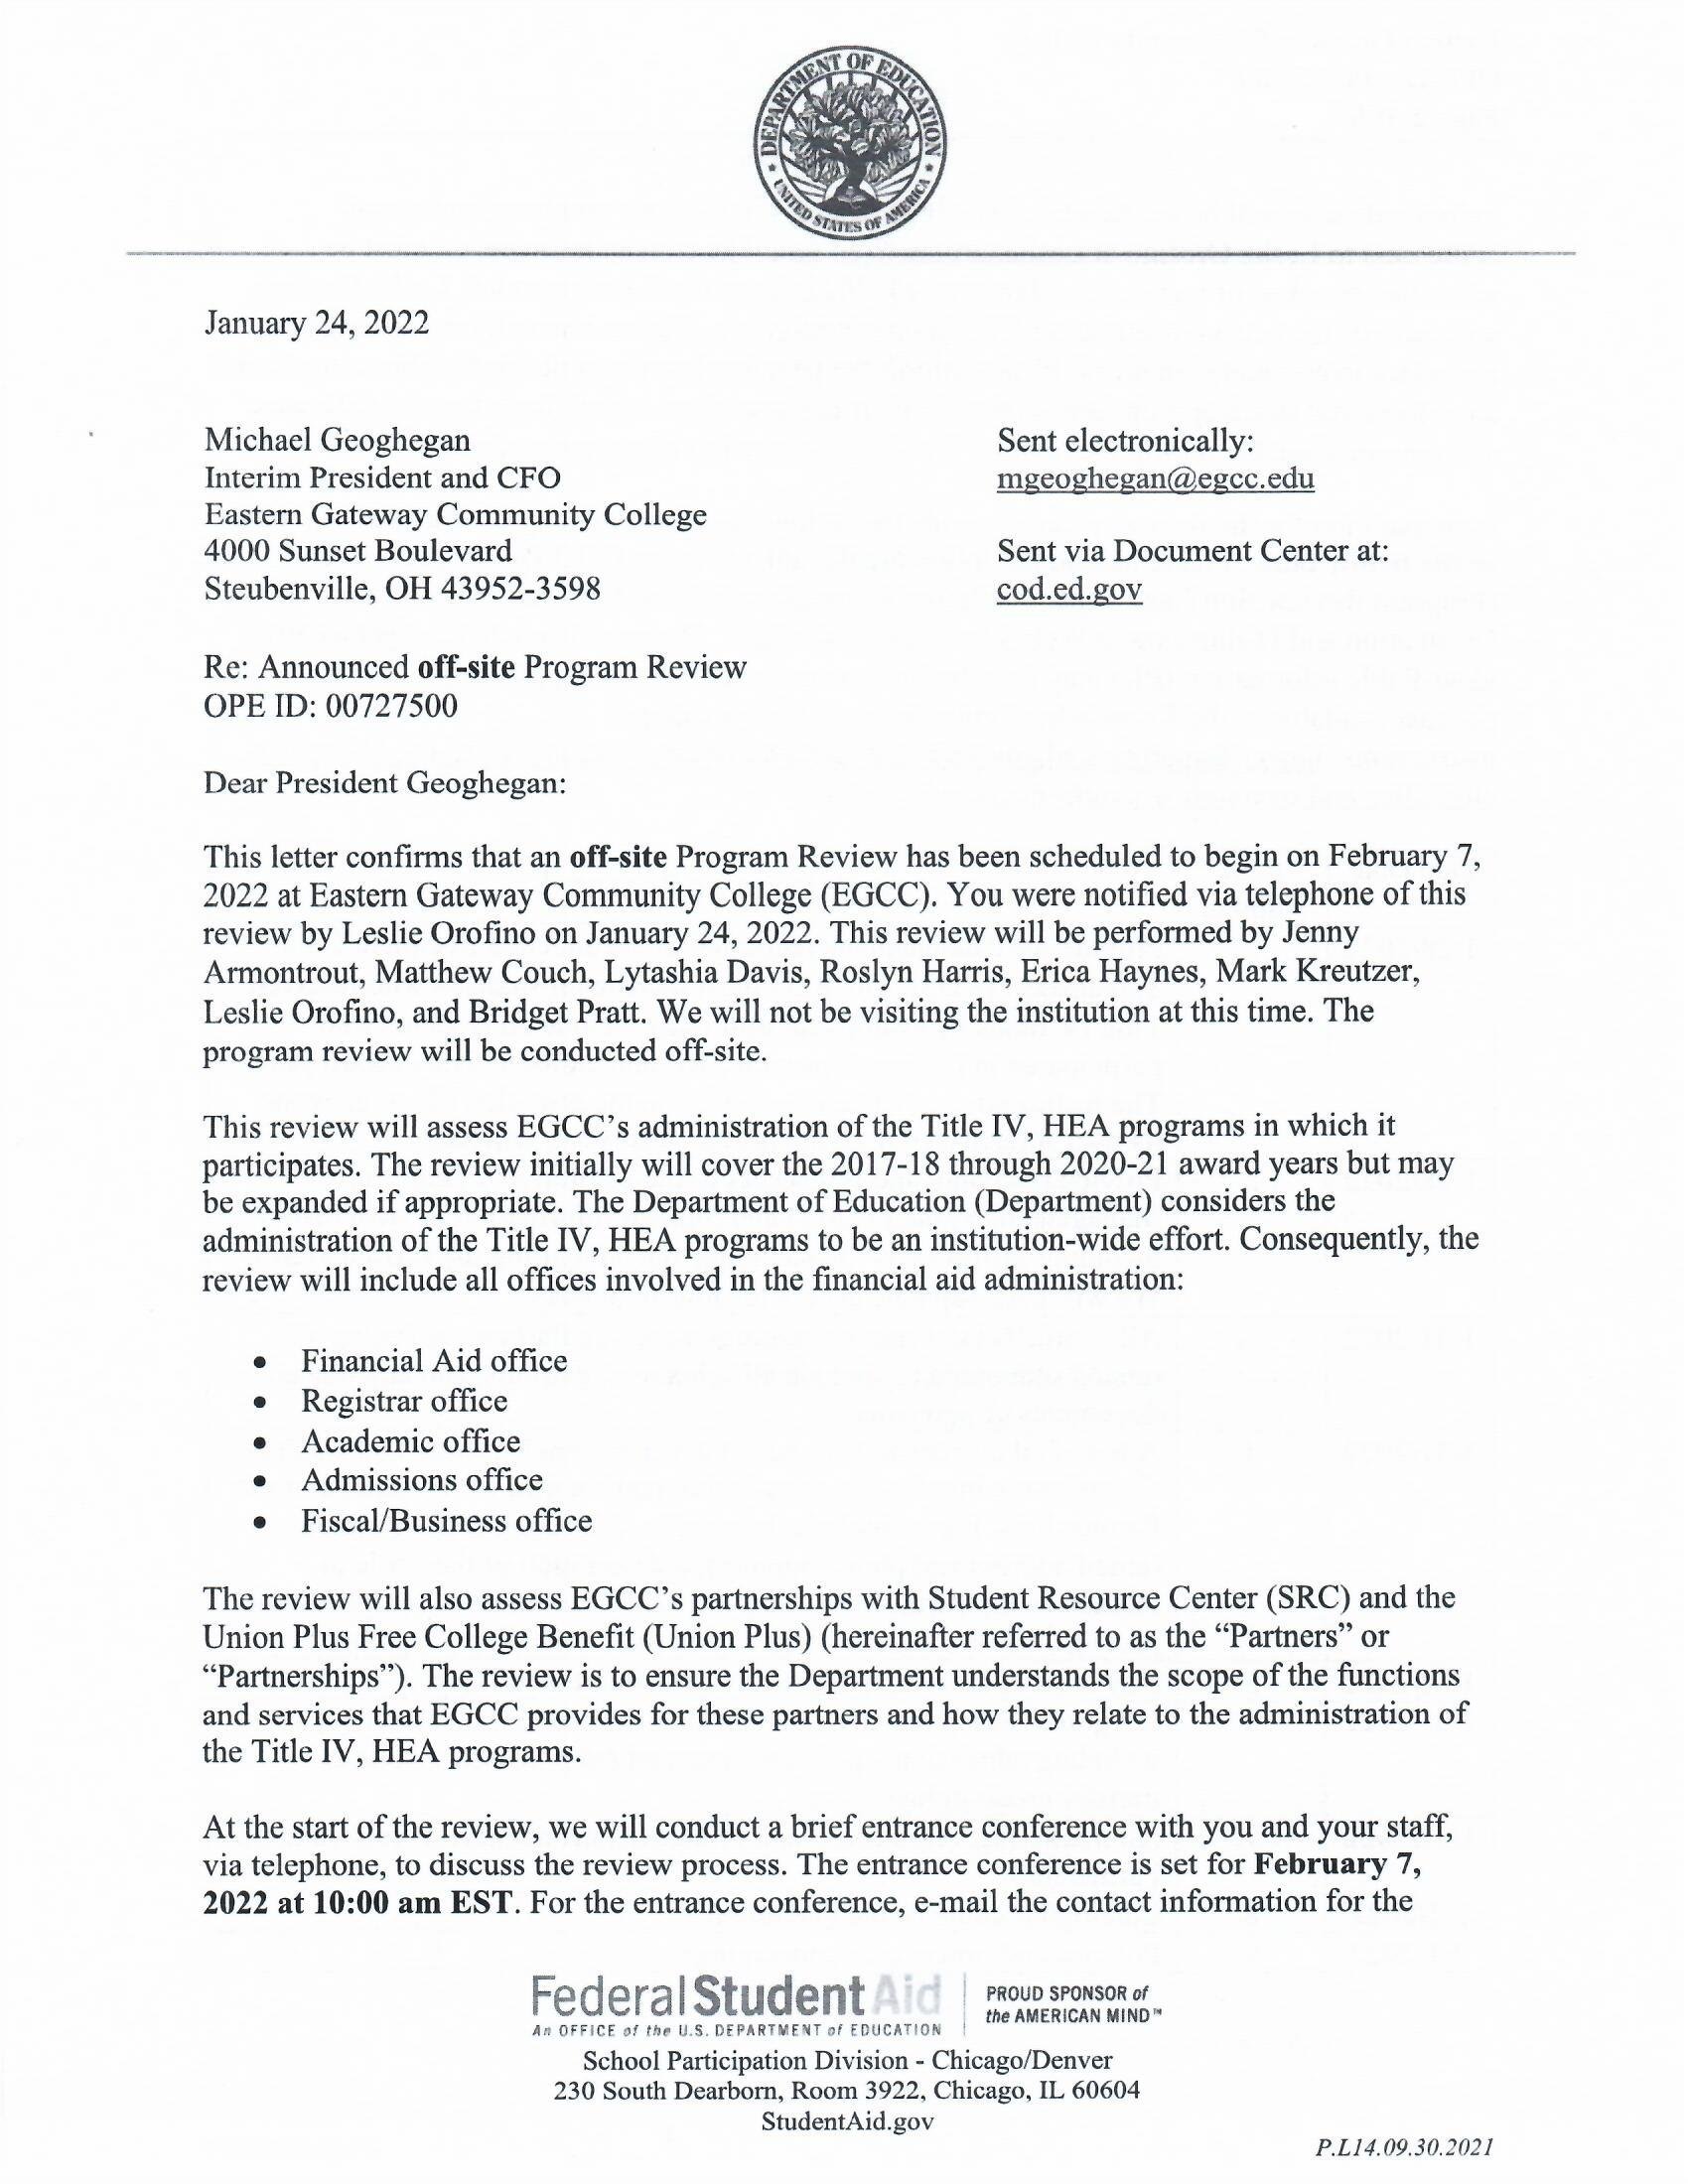 Letter from the U.S. Department of Education to Eastern Gateway Community College announcing program review.